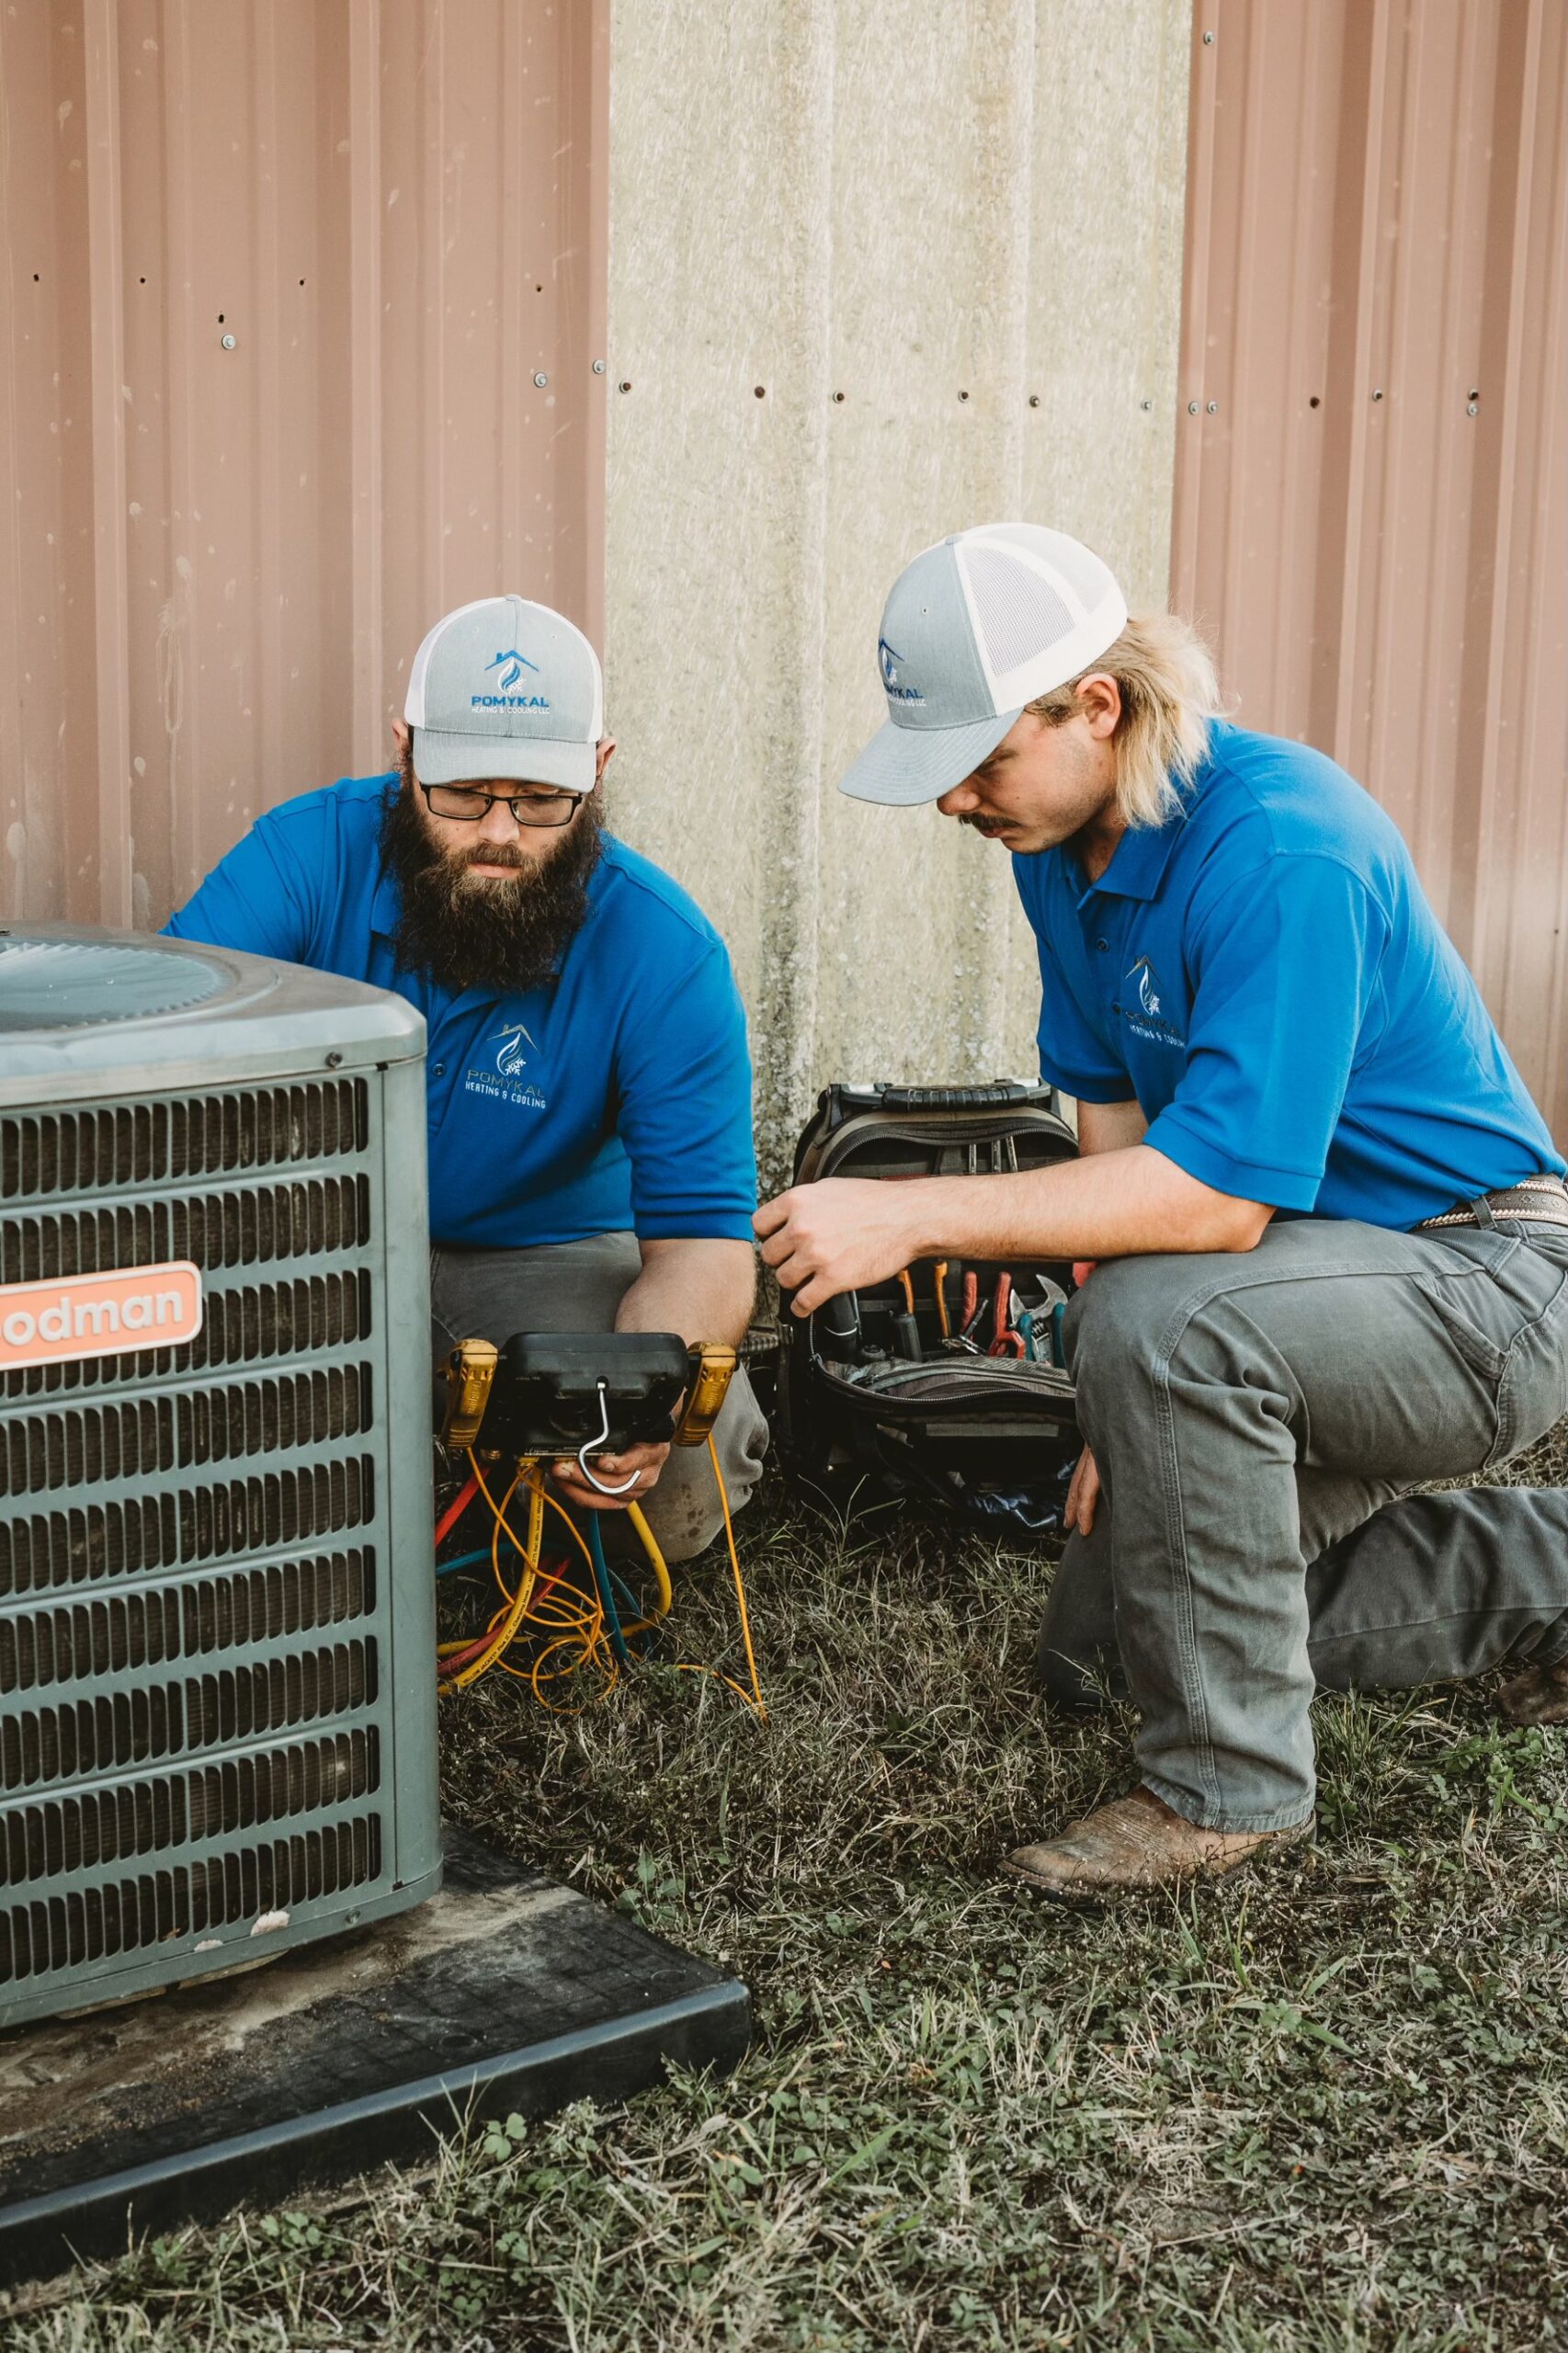 A technician from Pomykal Heating and Cooling working on an Air Conditioner.